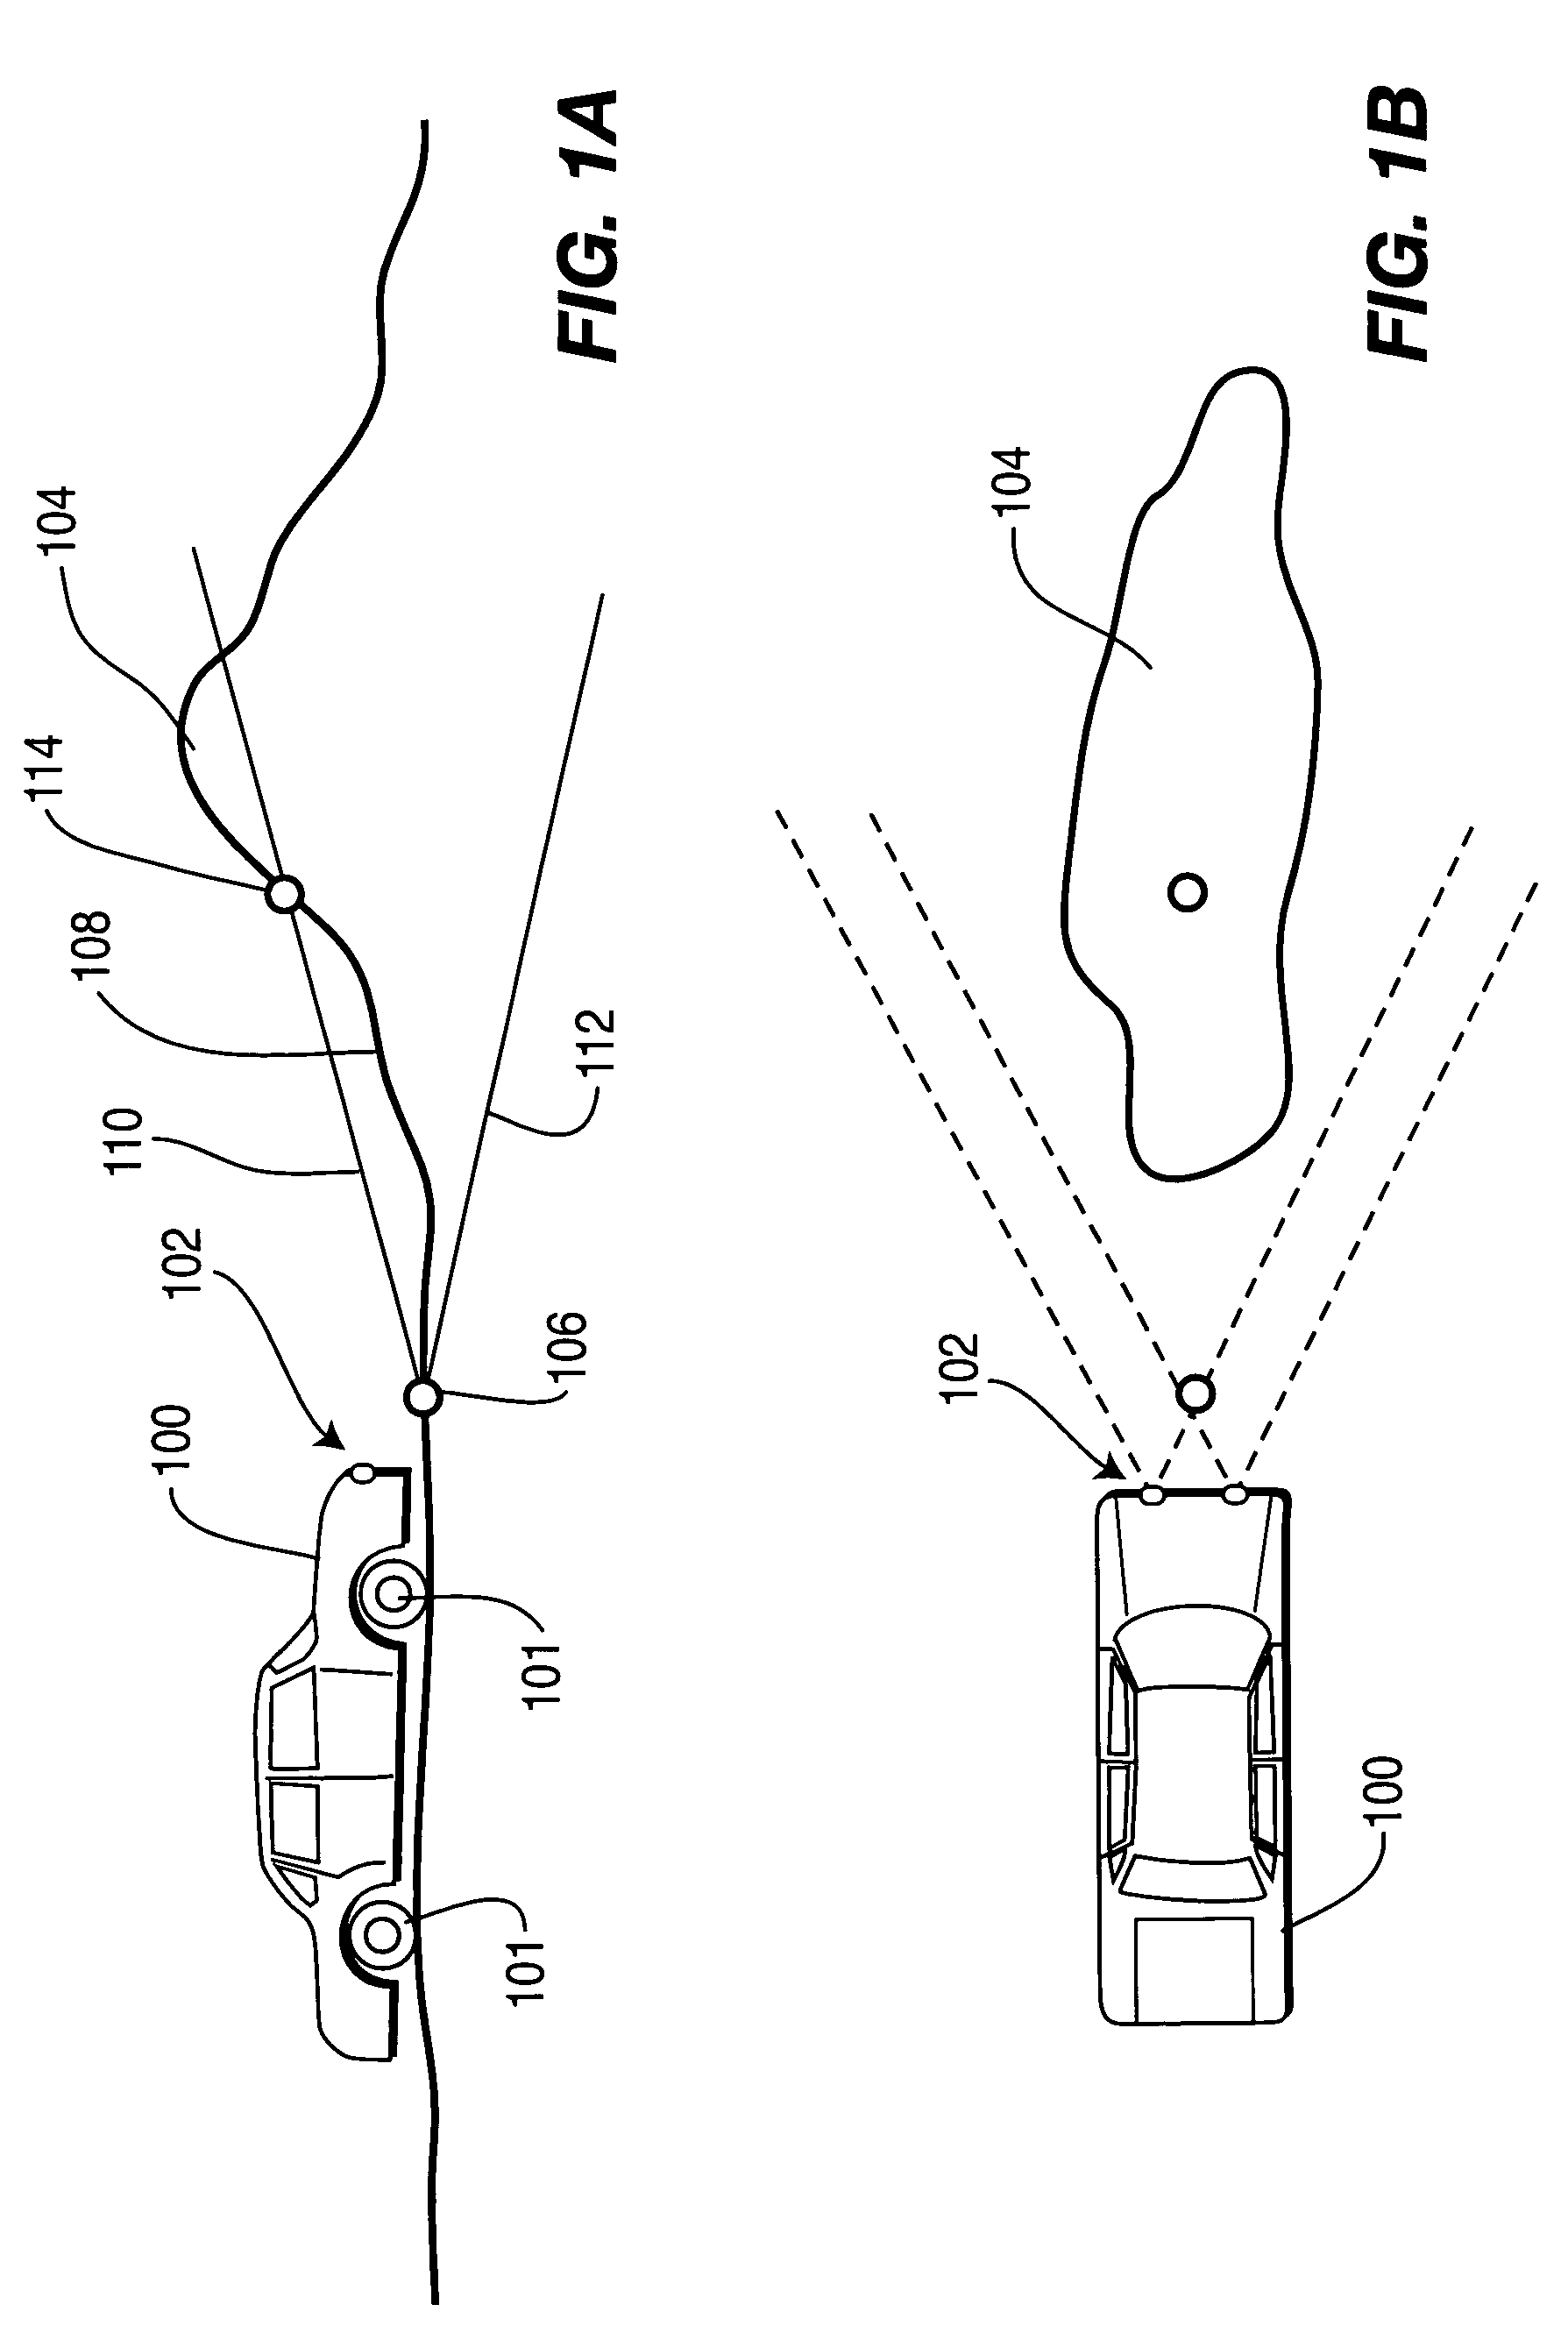 Method and apparatus for detecting obstacles